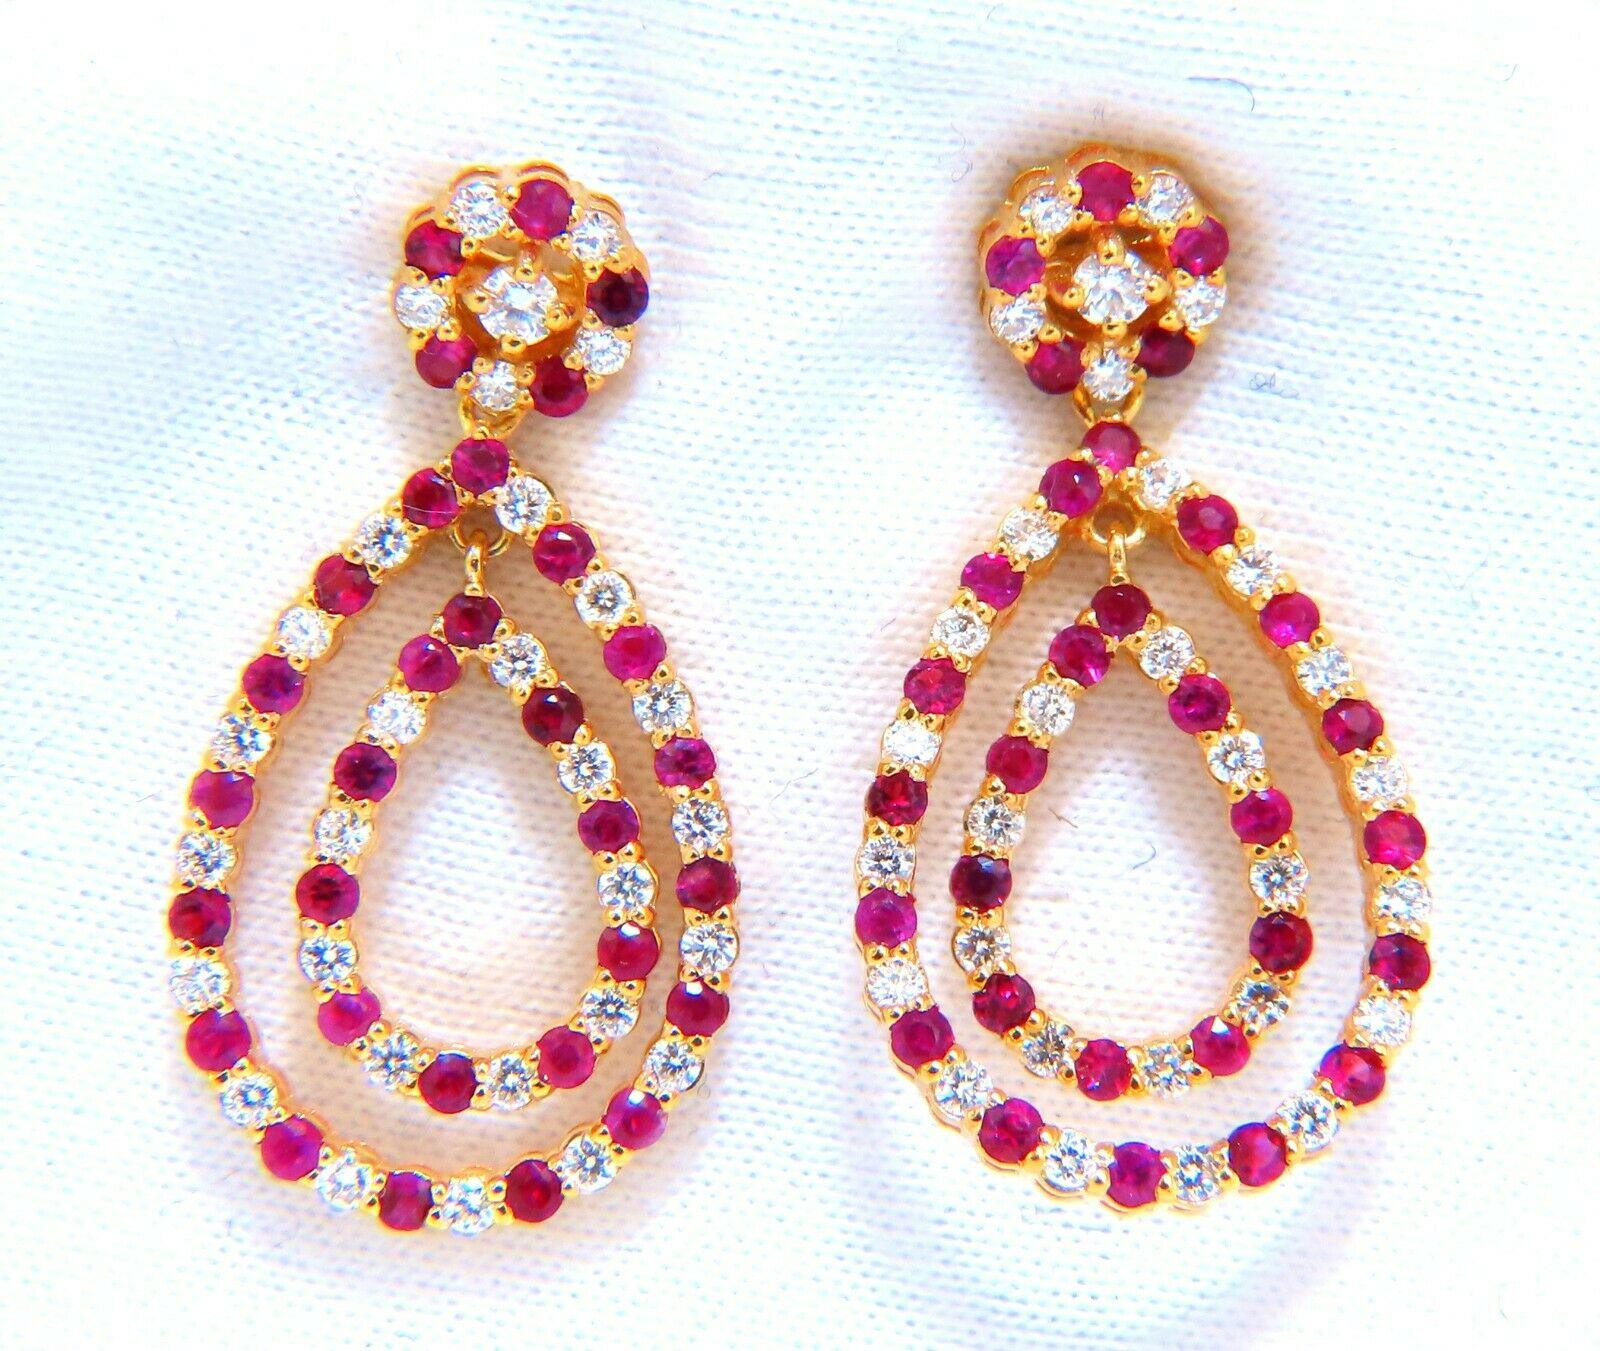 Ruby and Diamond Pear Form Dangle earrings.

1.20ct. round rubies, full brilliant cut clean clarity and transparent

.66ct. natural round diamonds G color vs2 clarity.

14 karat yellow gold 5.6 grams

28mm long 

15mm wide at largest pear